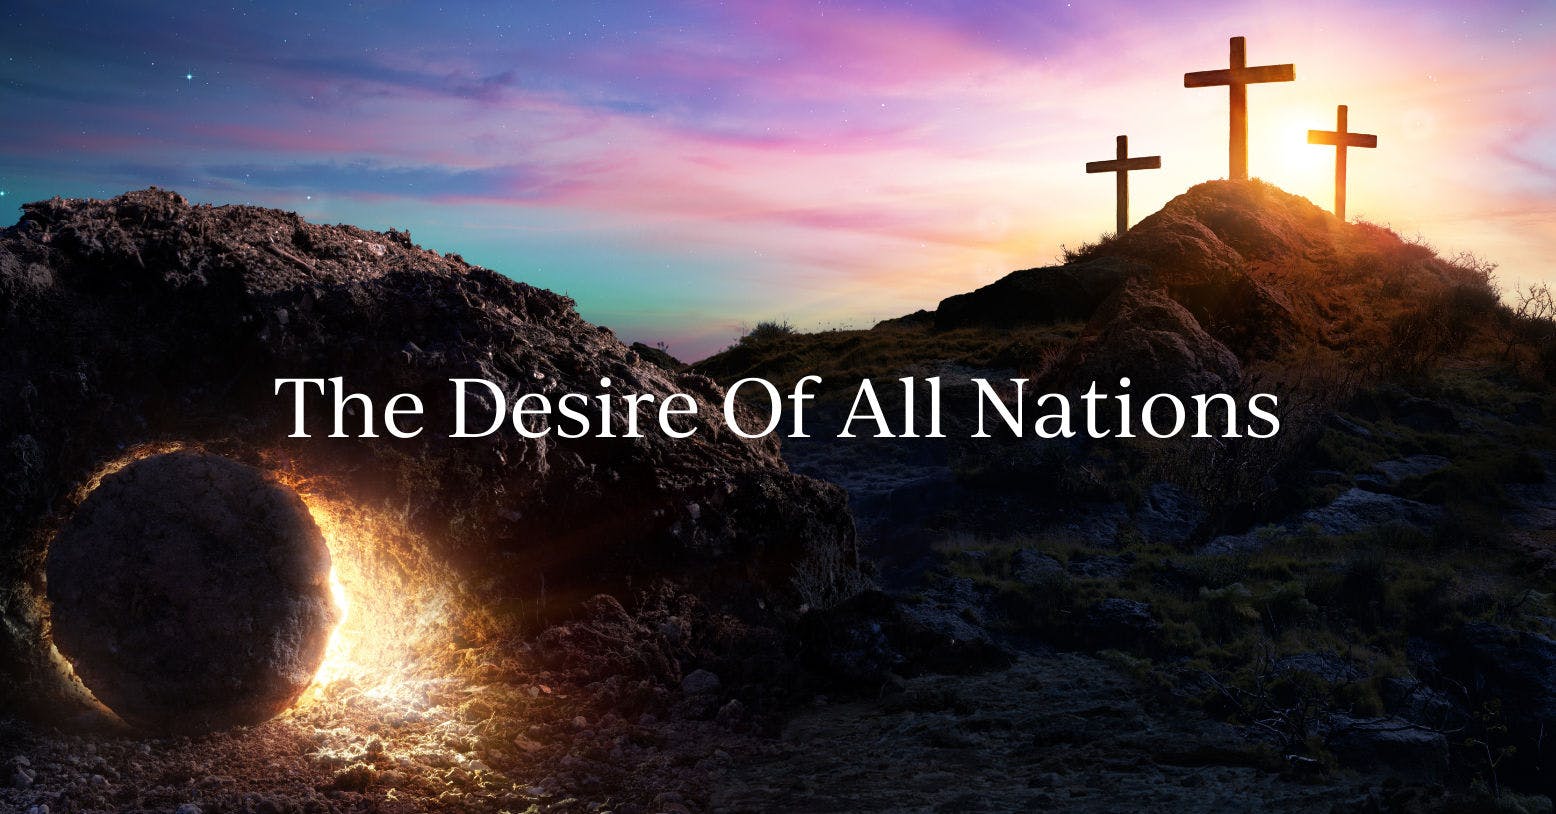 The Desire of All Nations